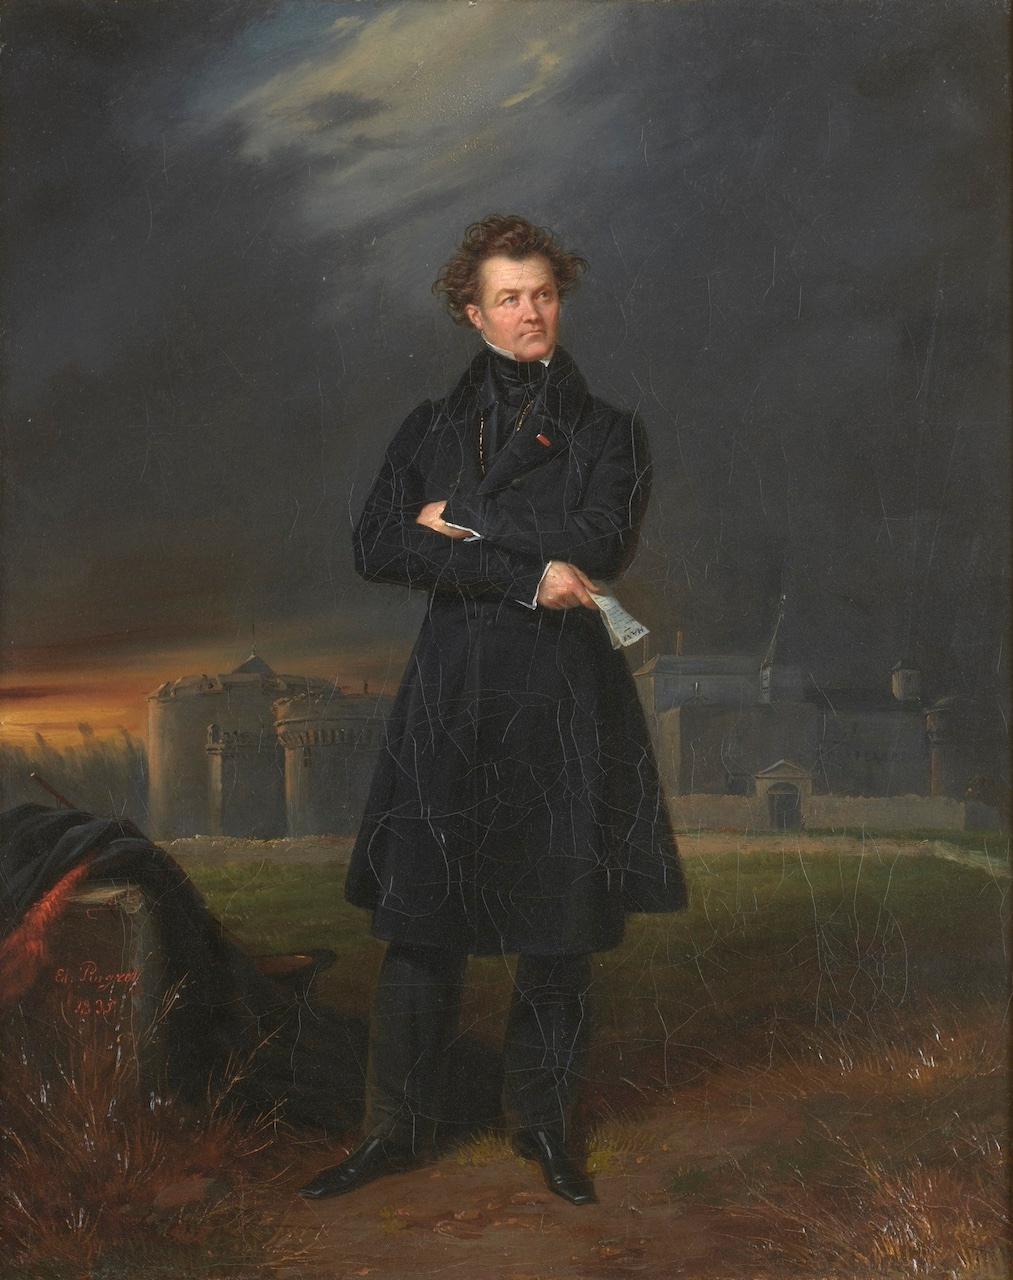 Presumed portrait of Athanase Peltier in front of the Fort of Ham - France - Painting by Edouard Pingret